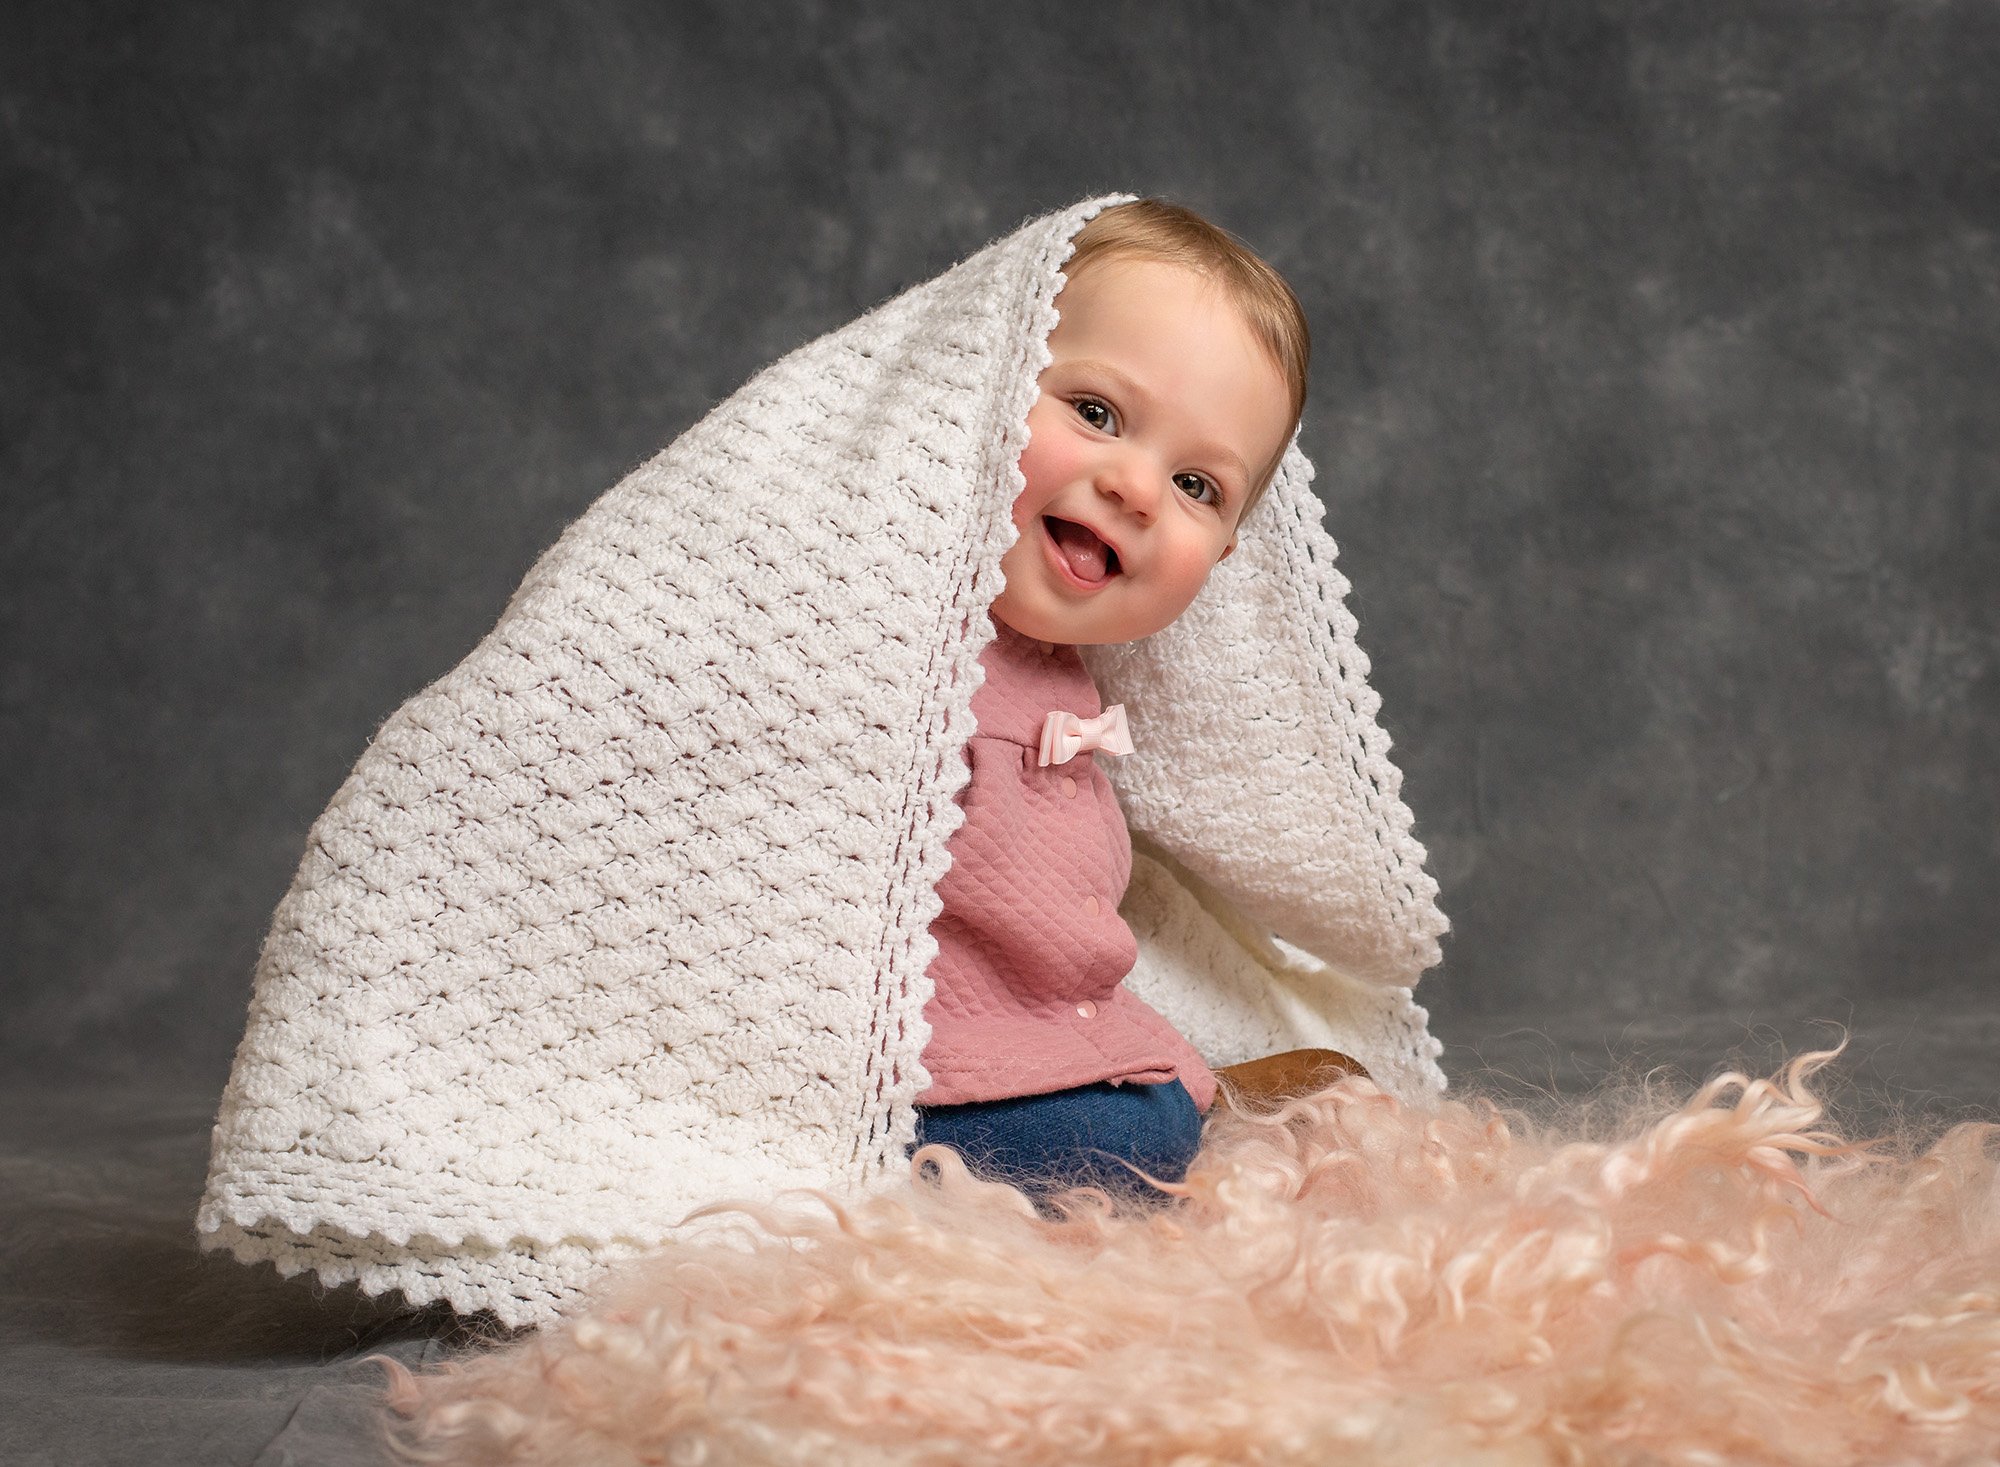 smiling baby girl with white blanket over her sitting in front of a pink fuzzy blanket